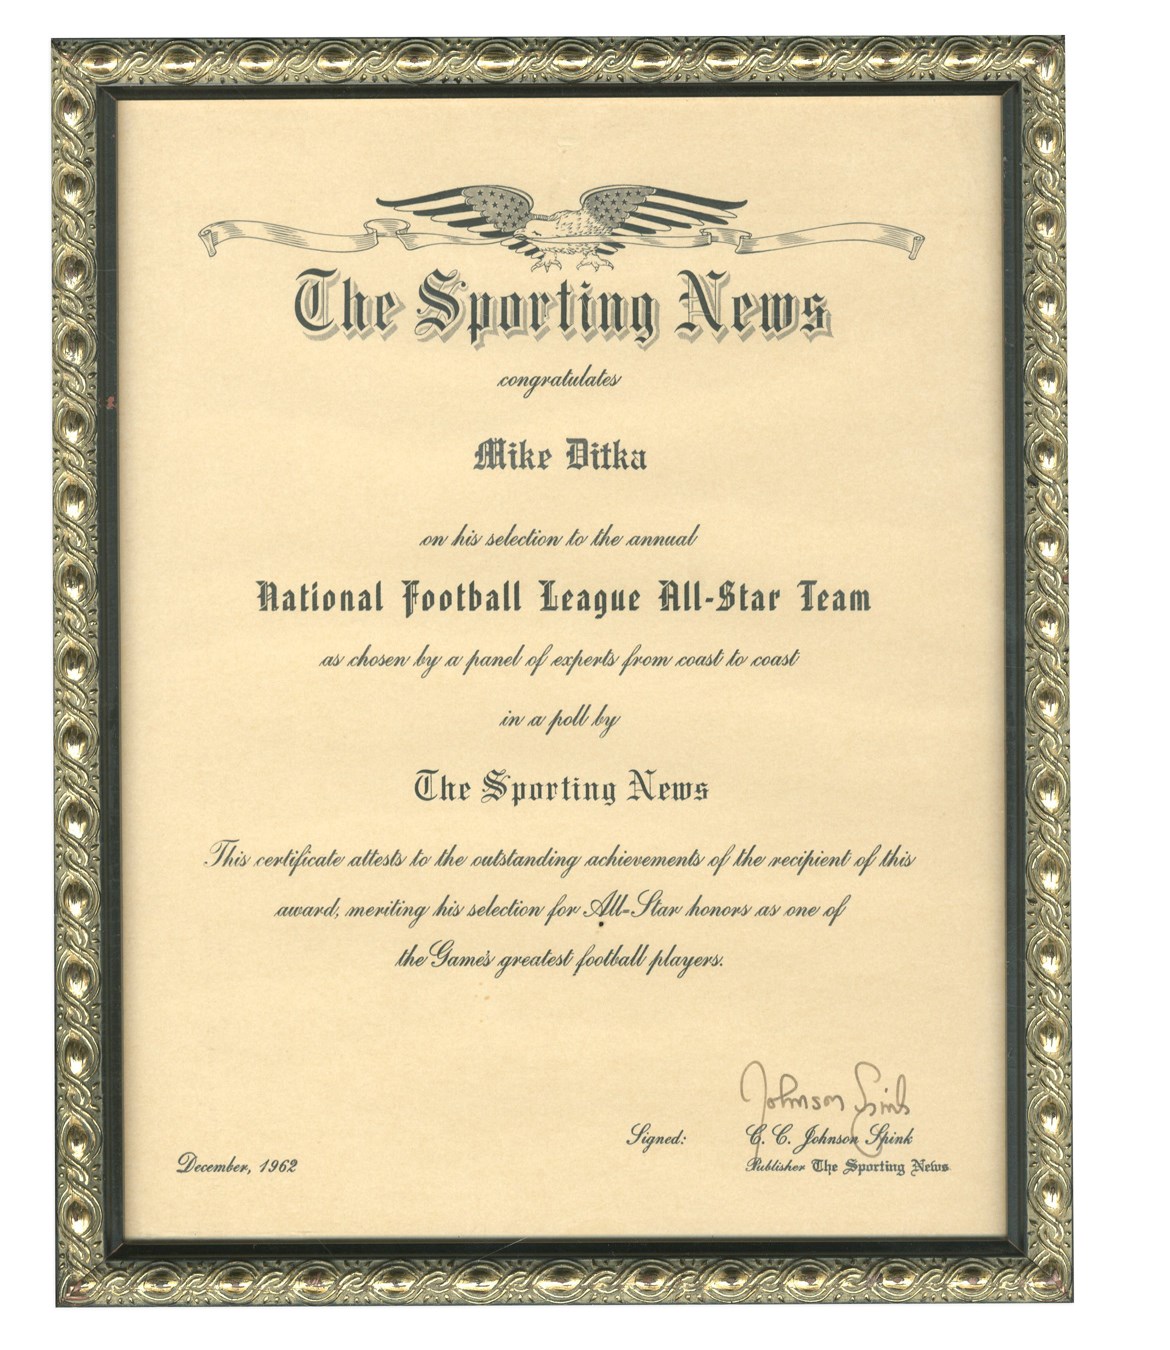 Football - Mike Ditka 1960s Sporting News NFL All-Star Award (ex-Mike Ditka)